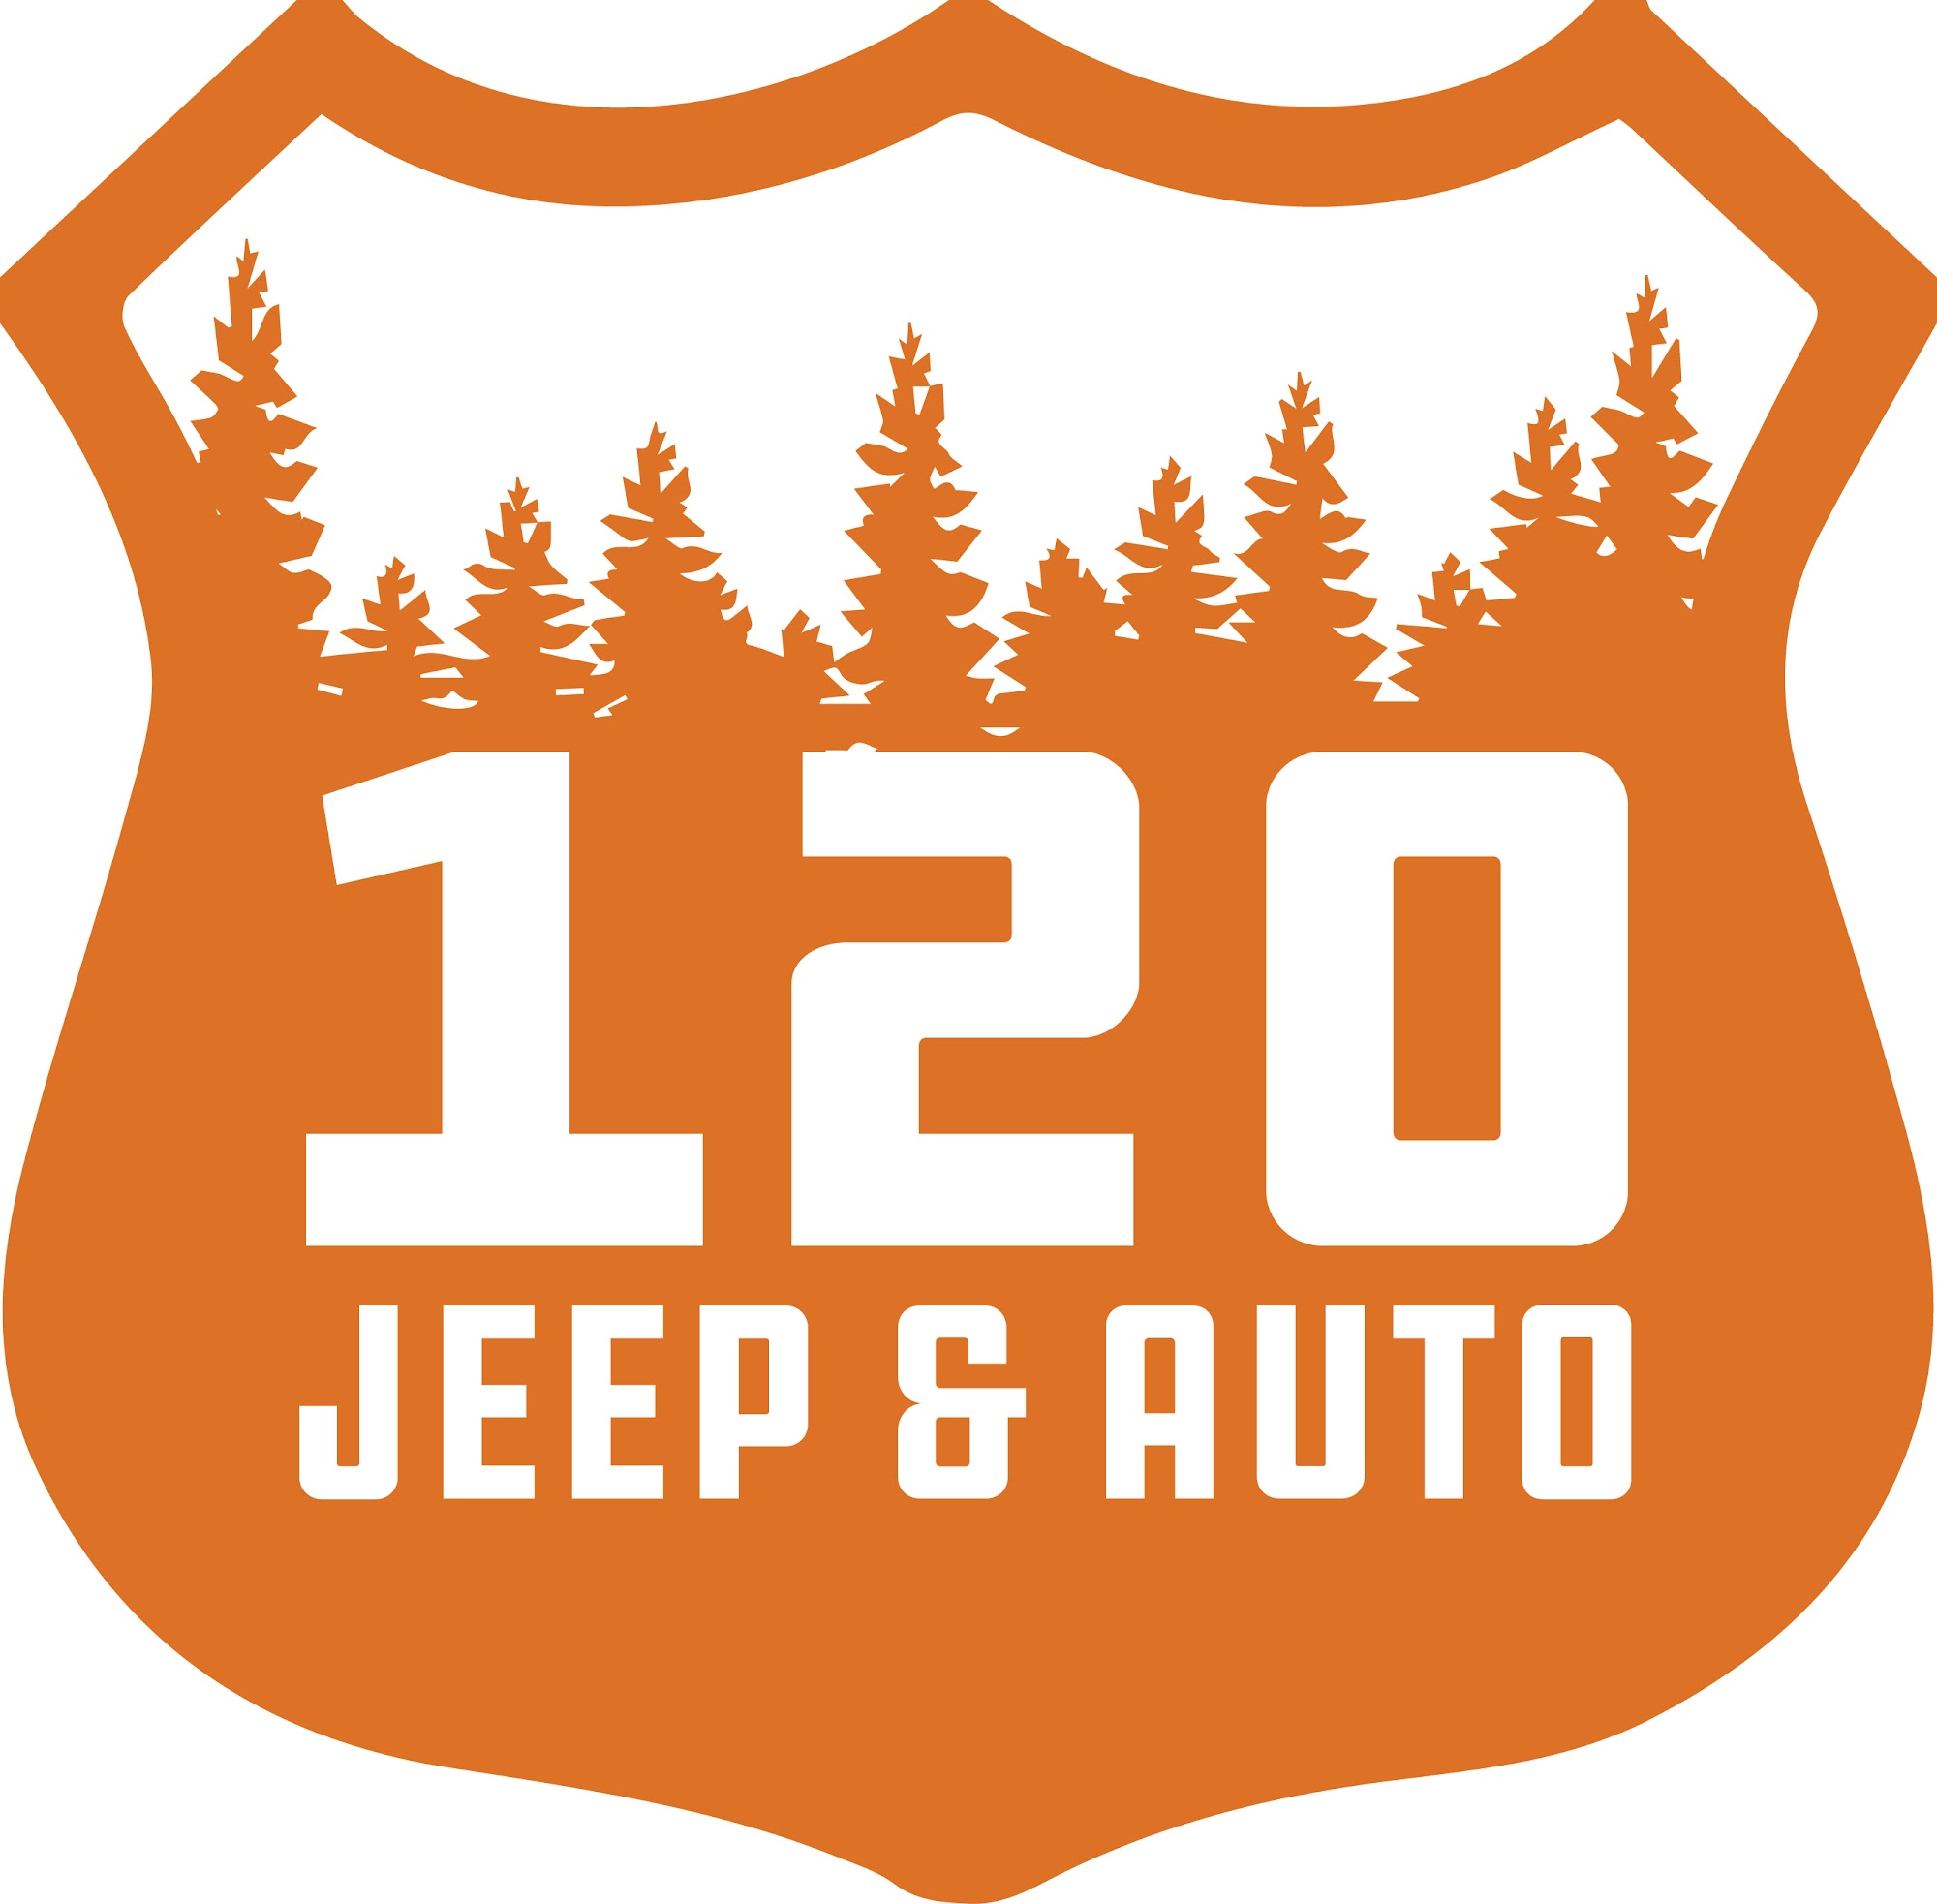 120 Jeep and Auto